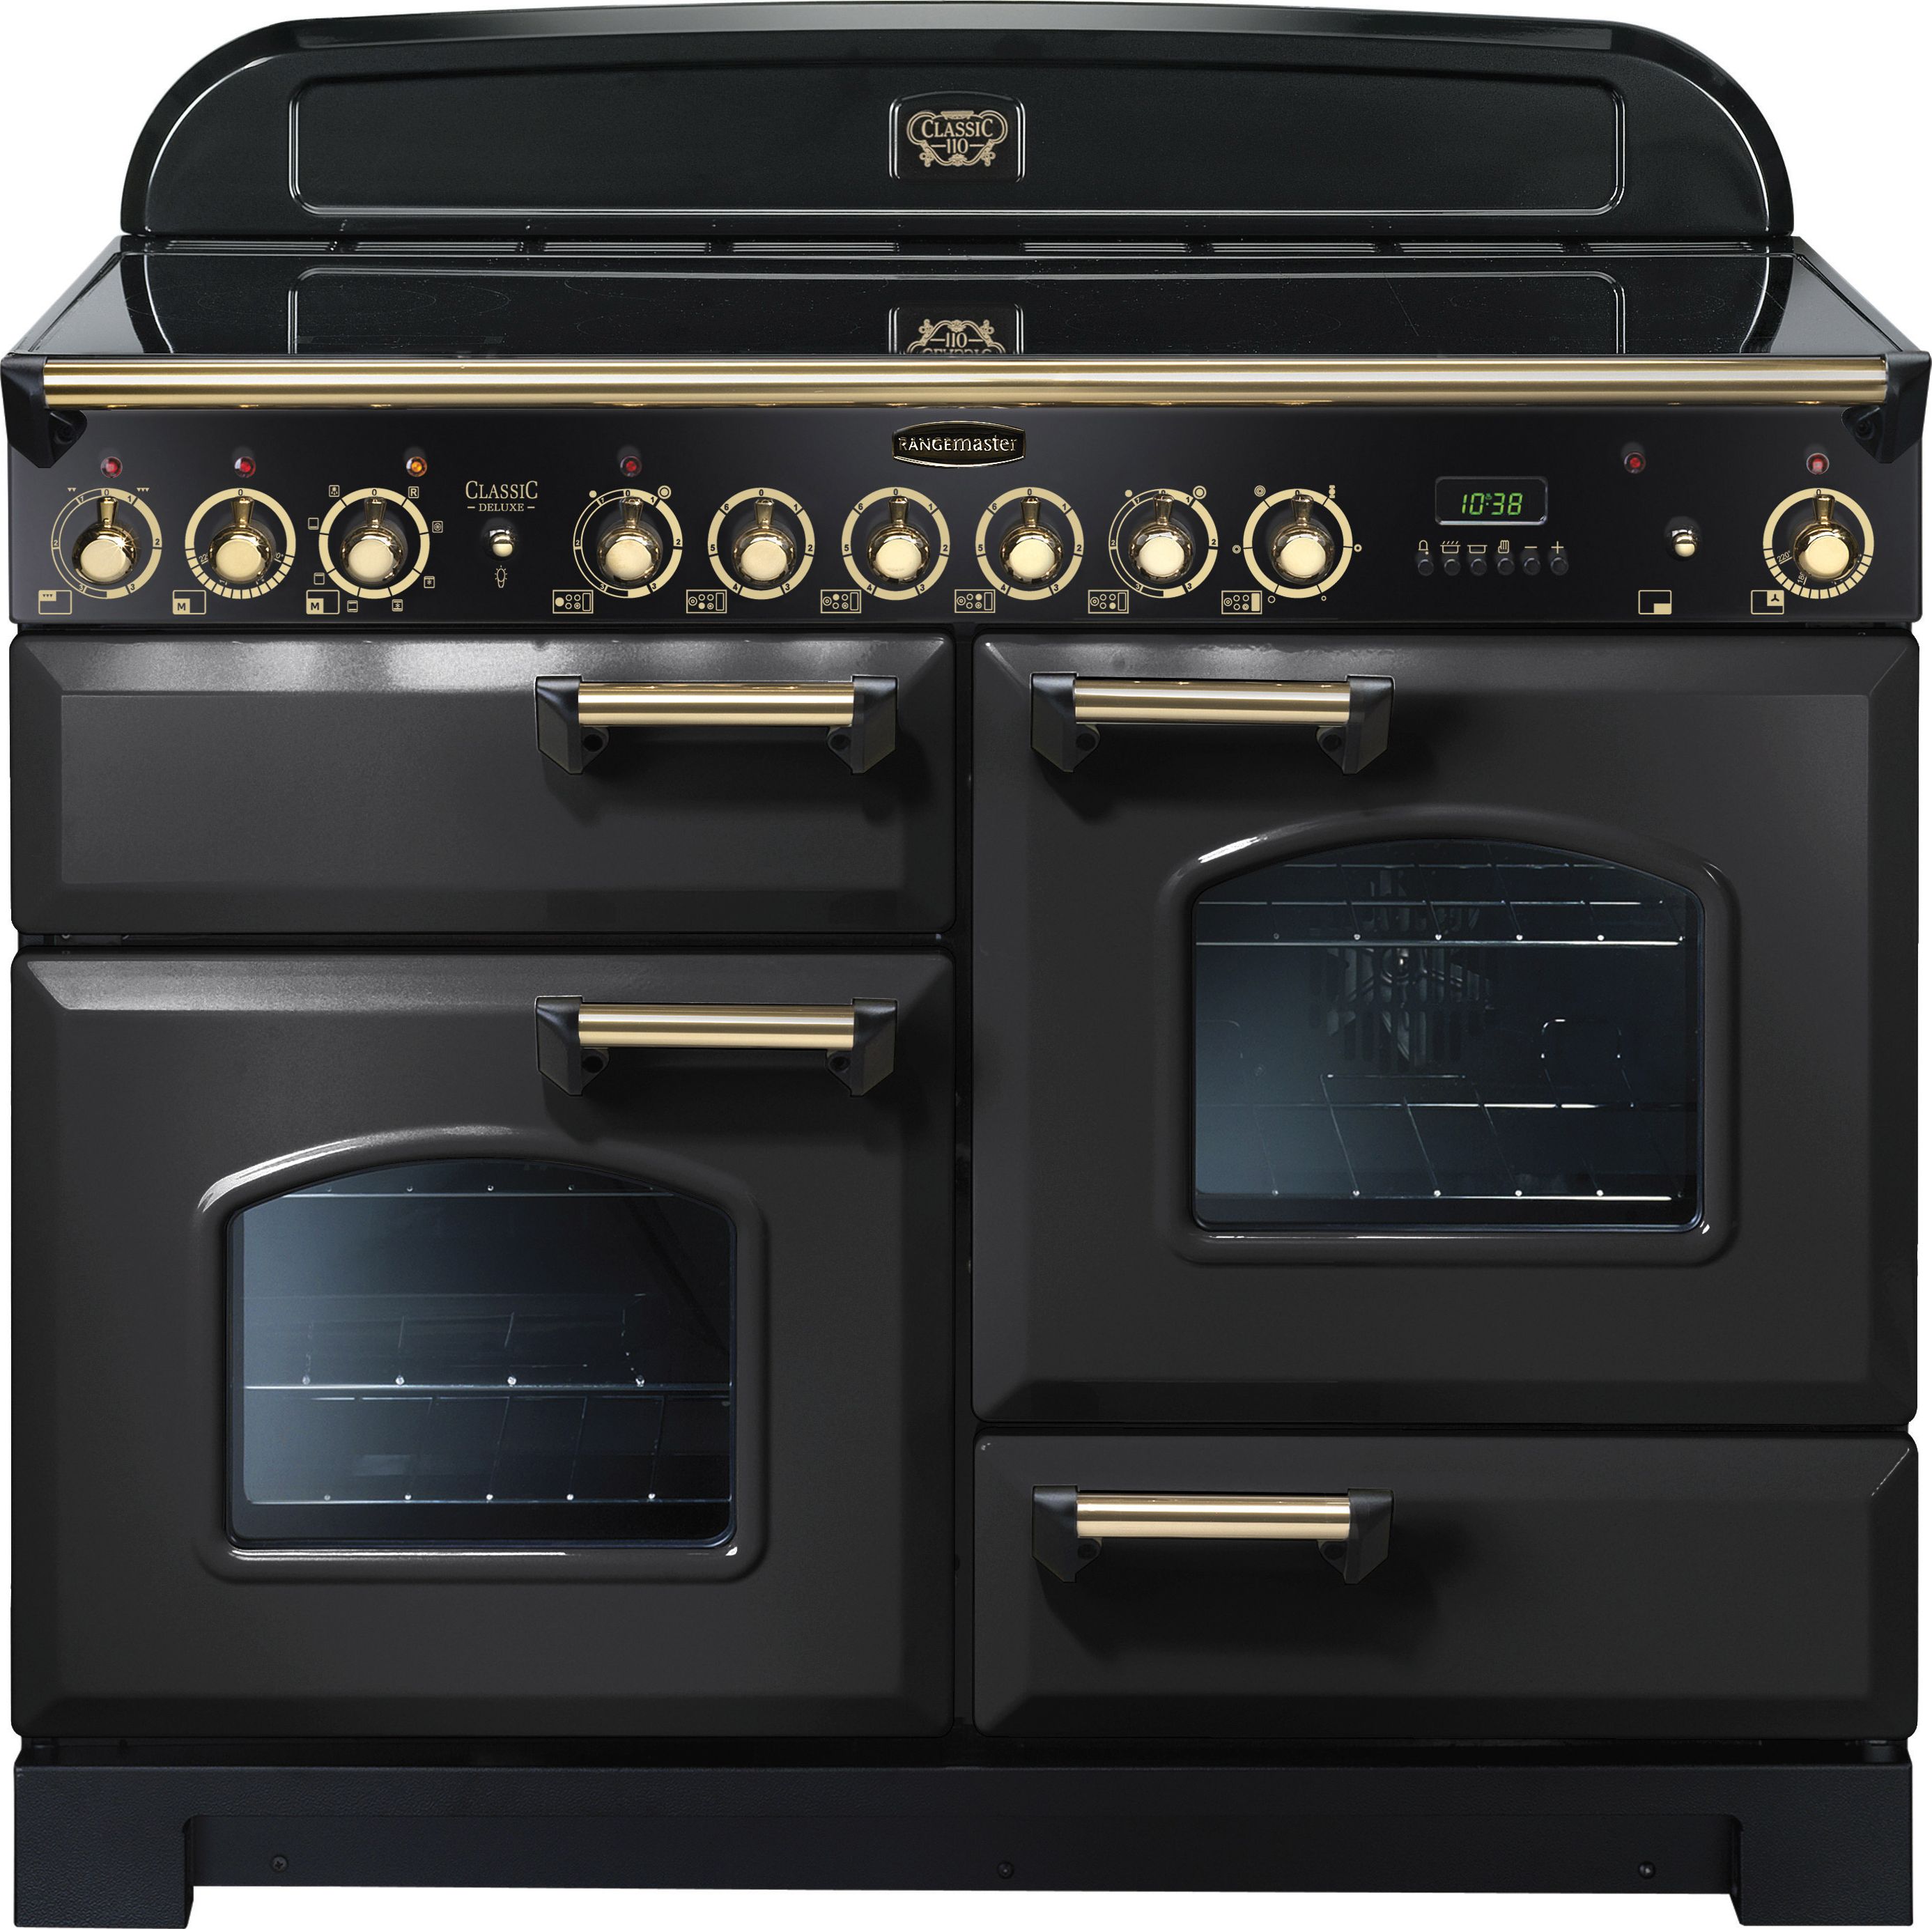 Rangemaster Classic Deluxe CDL110ECCB/B 110cm Electric Range Cooker with Ceramic Hob - Charcoal Black / Brass - A/A Rated, Black